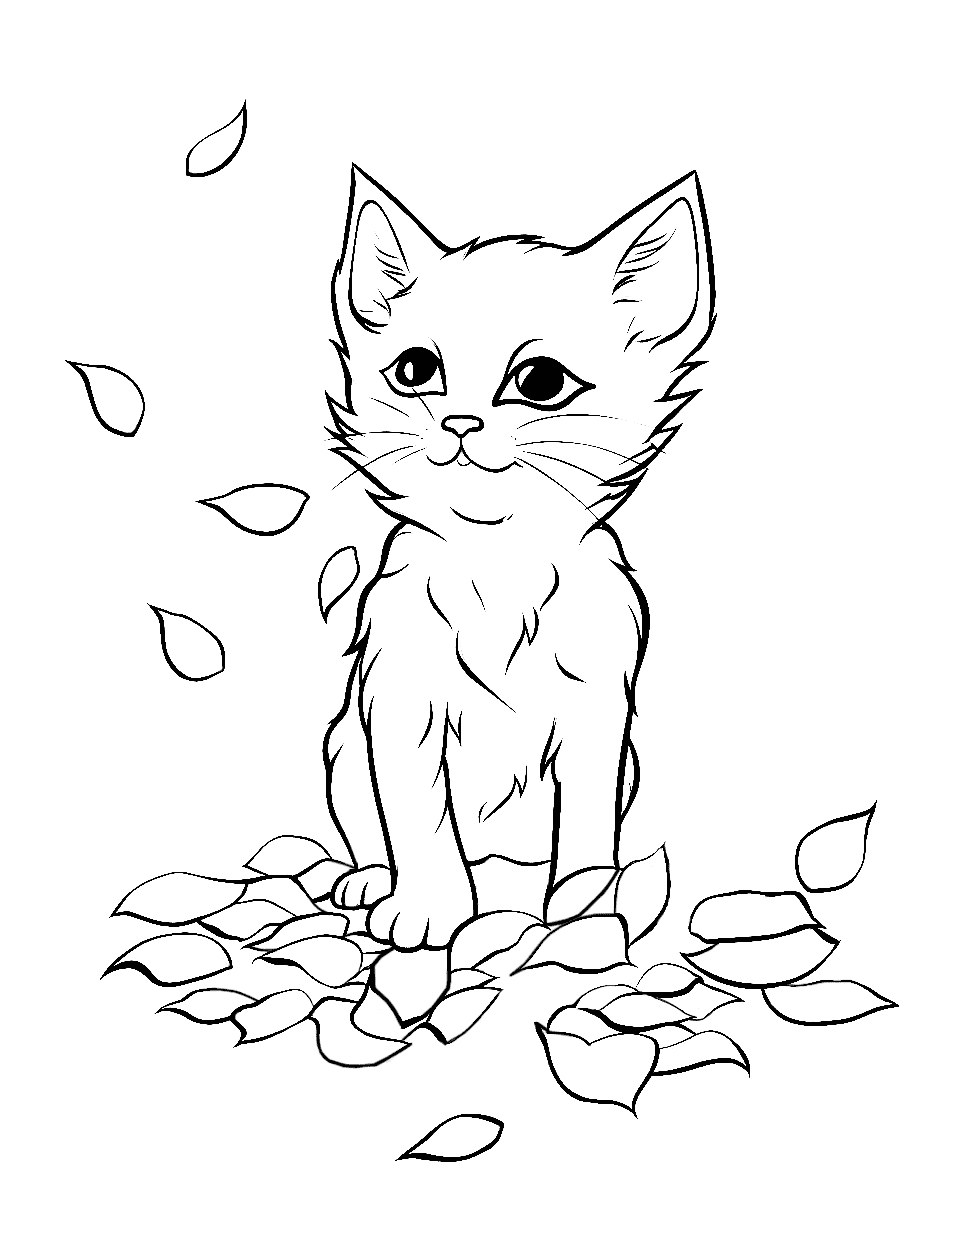 Kitten Playing with Petals Coloring Page - A playful kitten batting at fallen rose petals, intrigued by their movement.